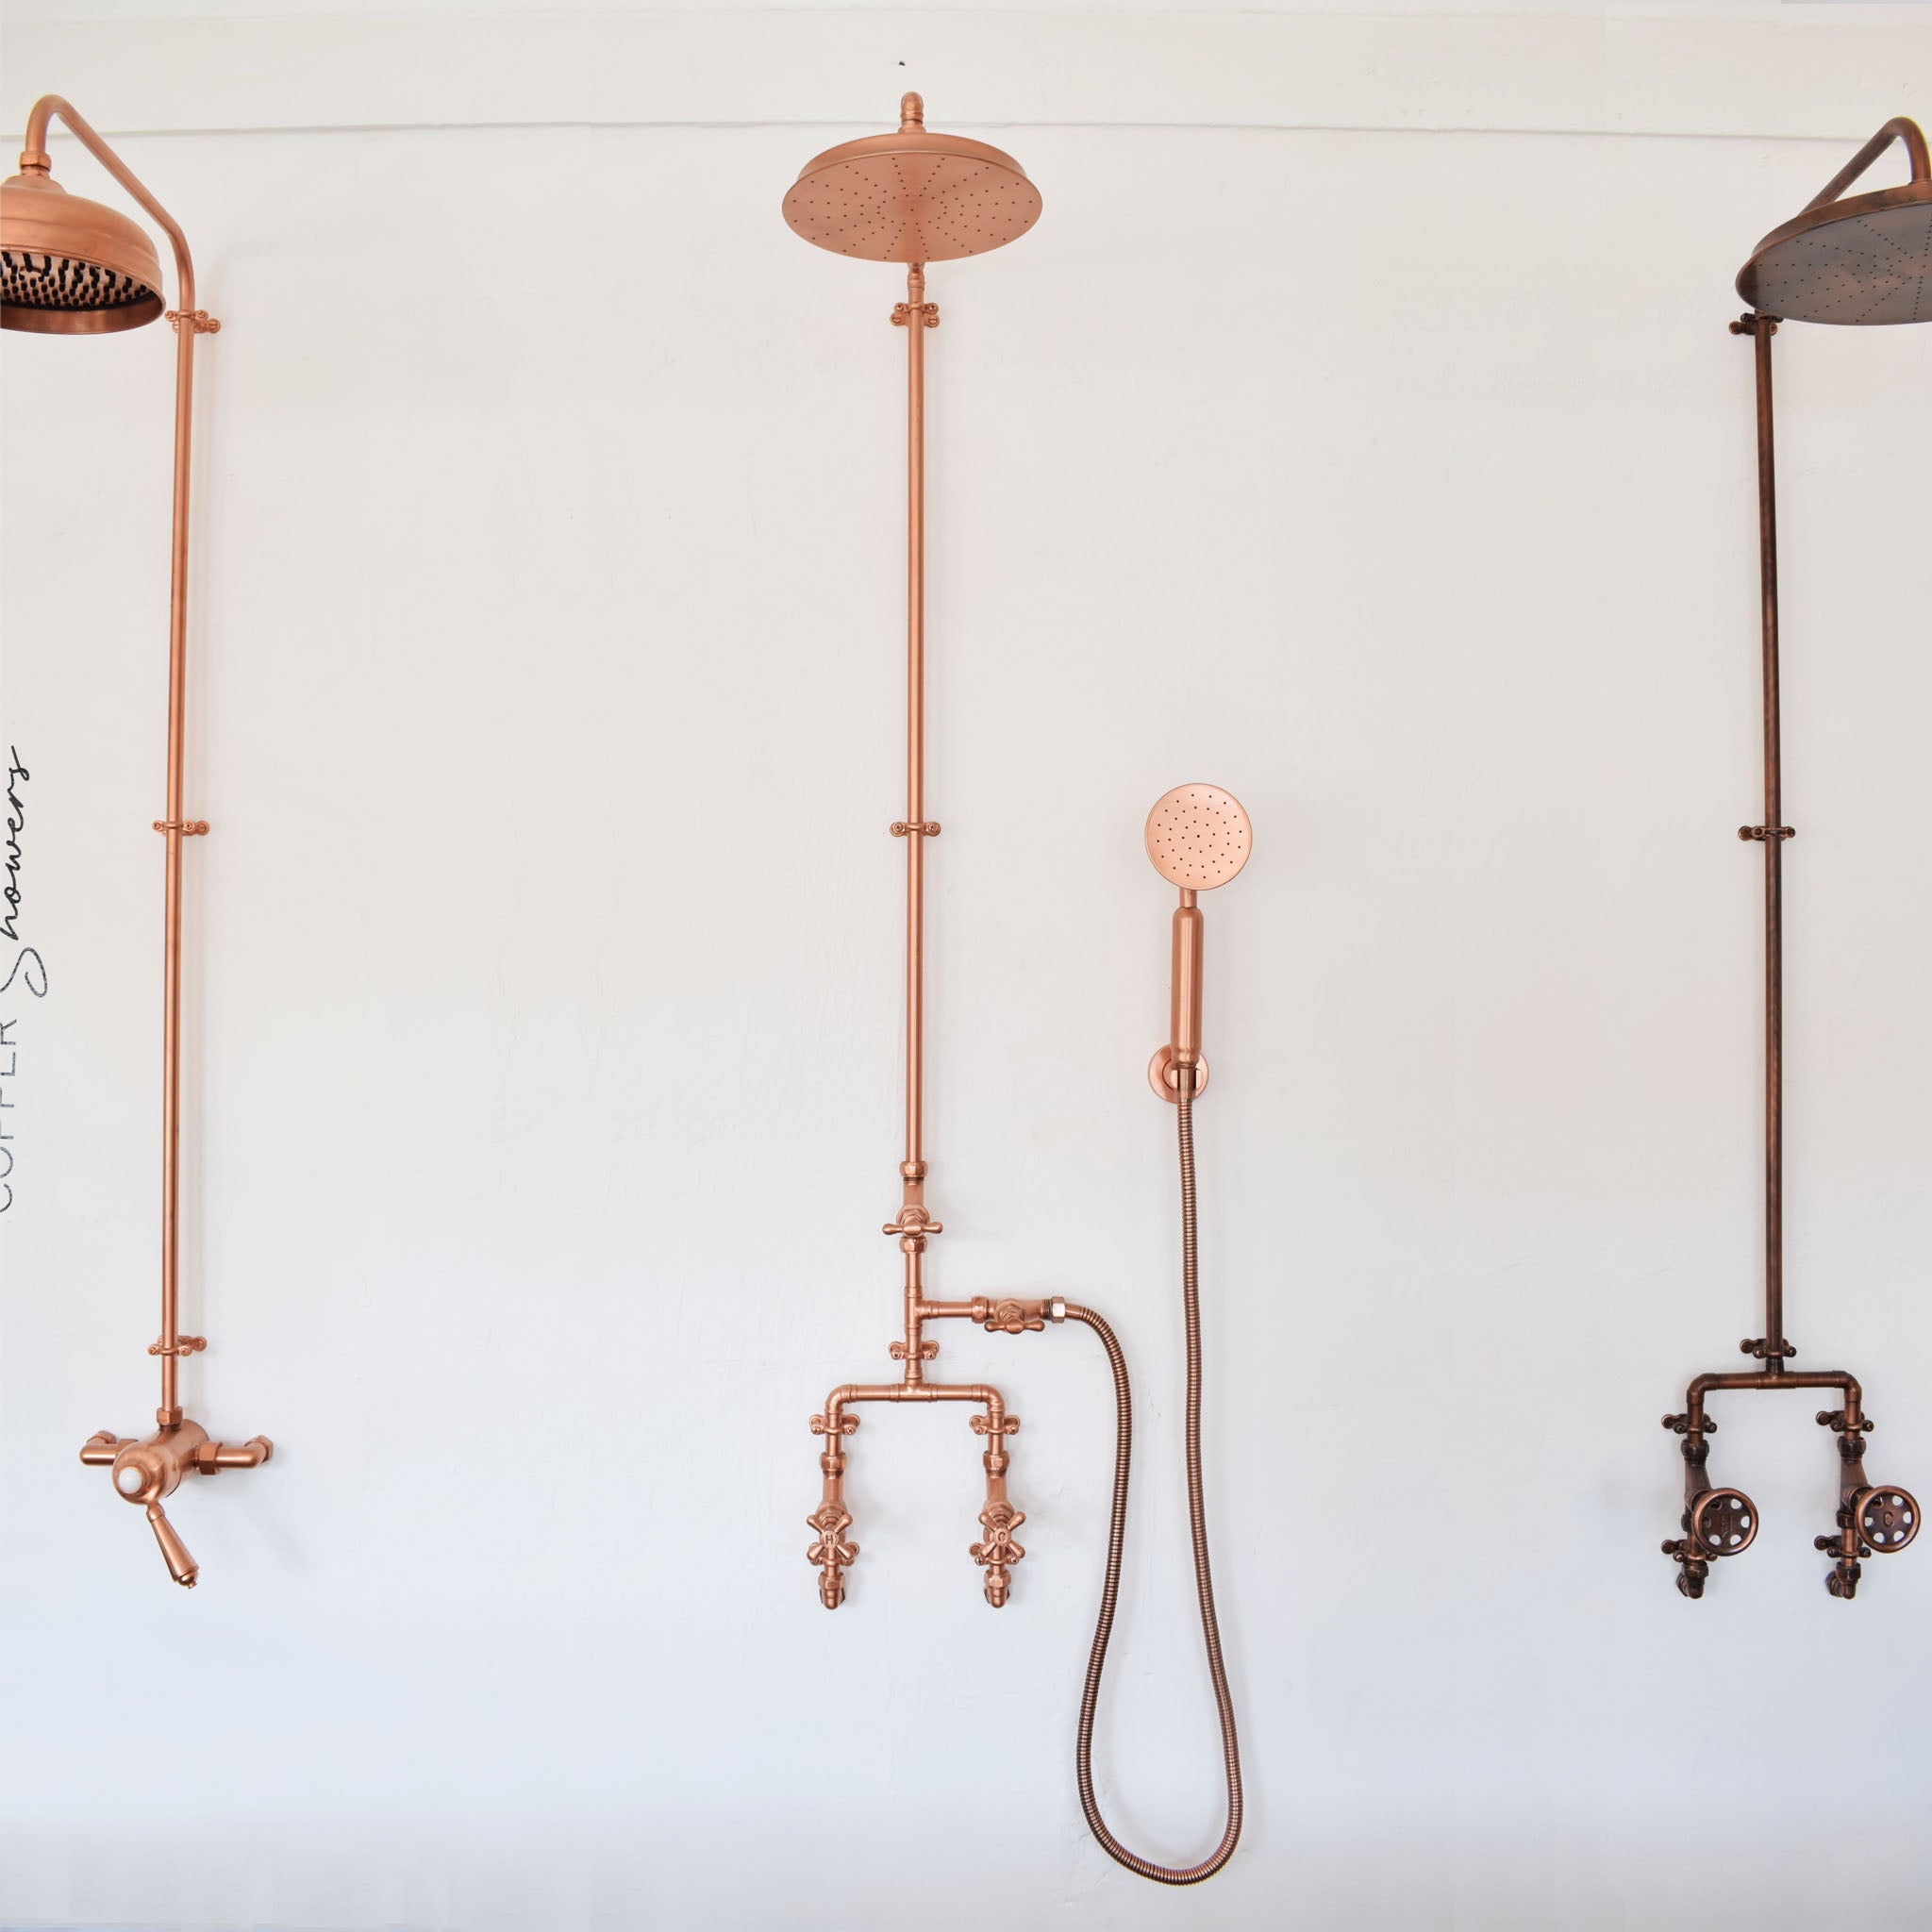 Our stunning copper shower with handset adds a touch of elegance to any bathroom while providing a powerful, invigorating spray.